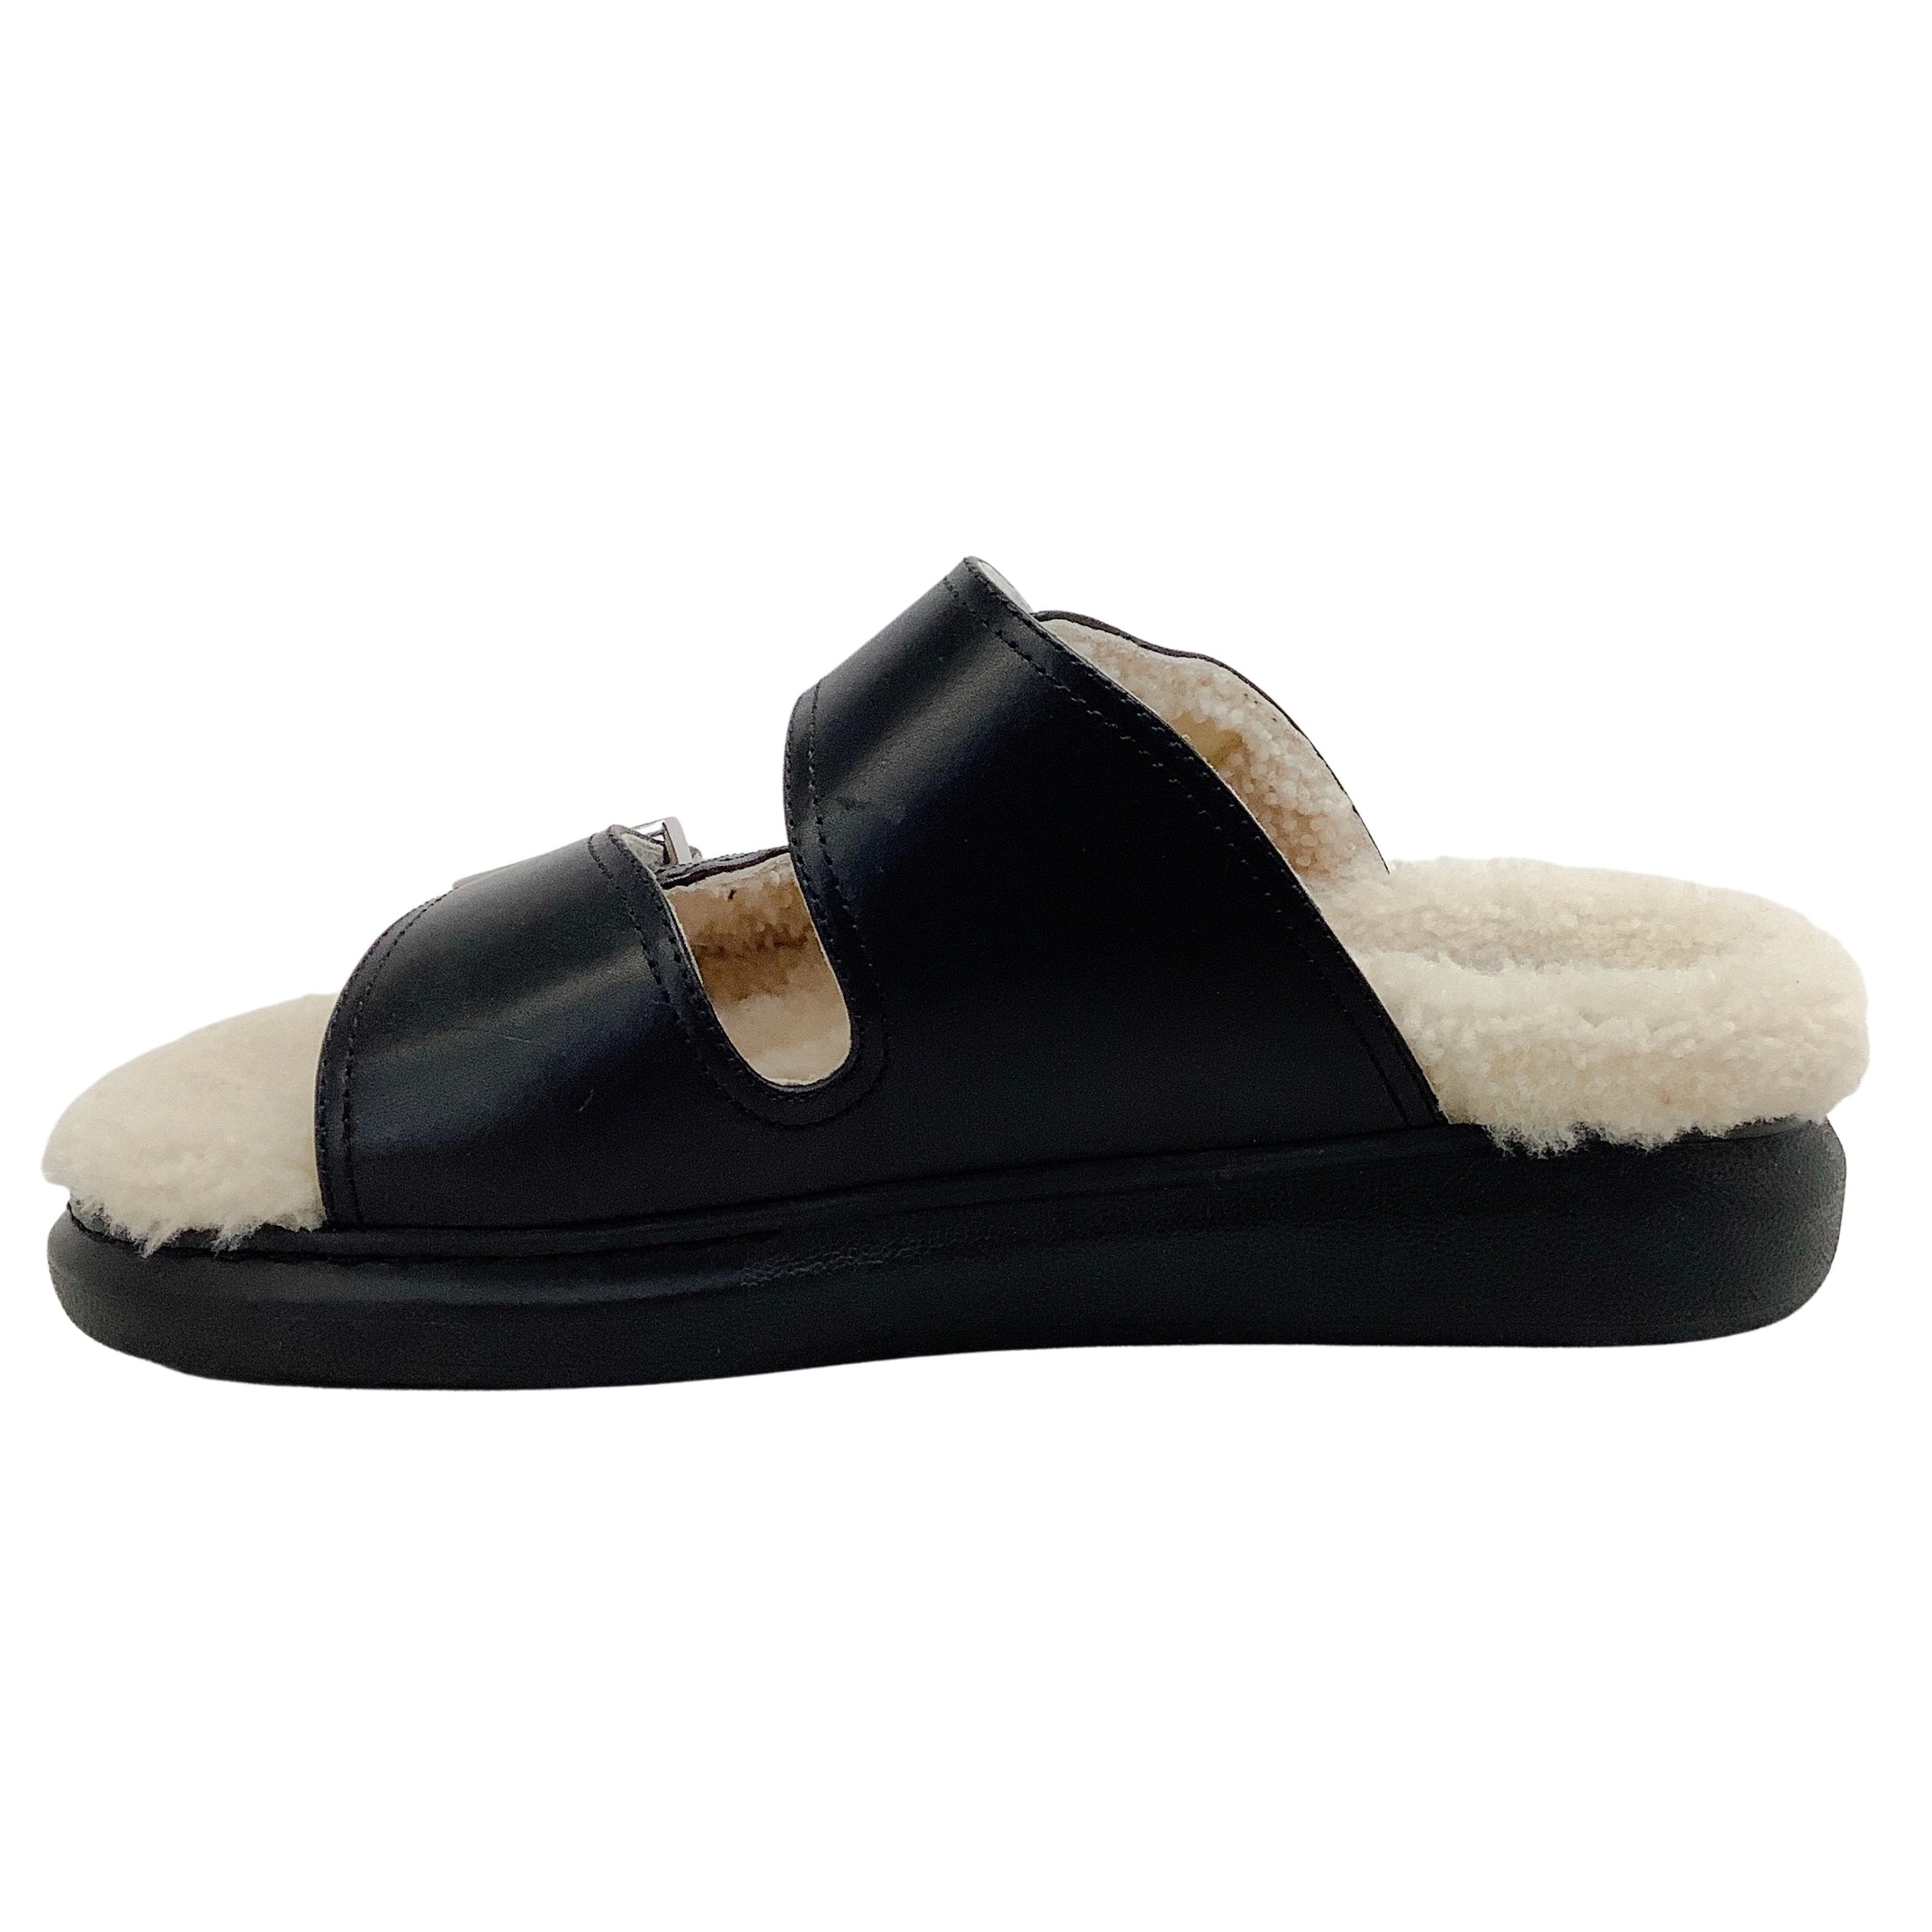 Alexander McQueen Black Leather Sandals with Shearling